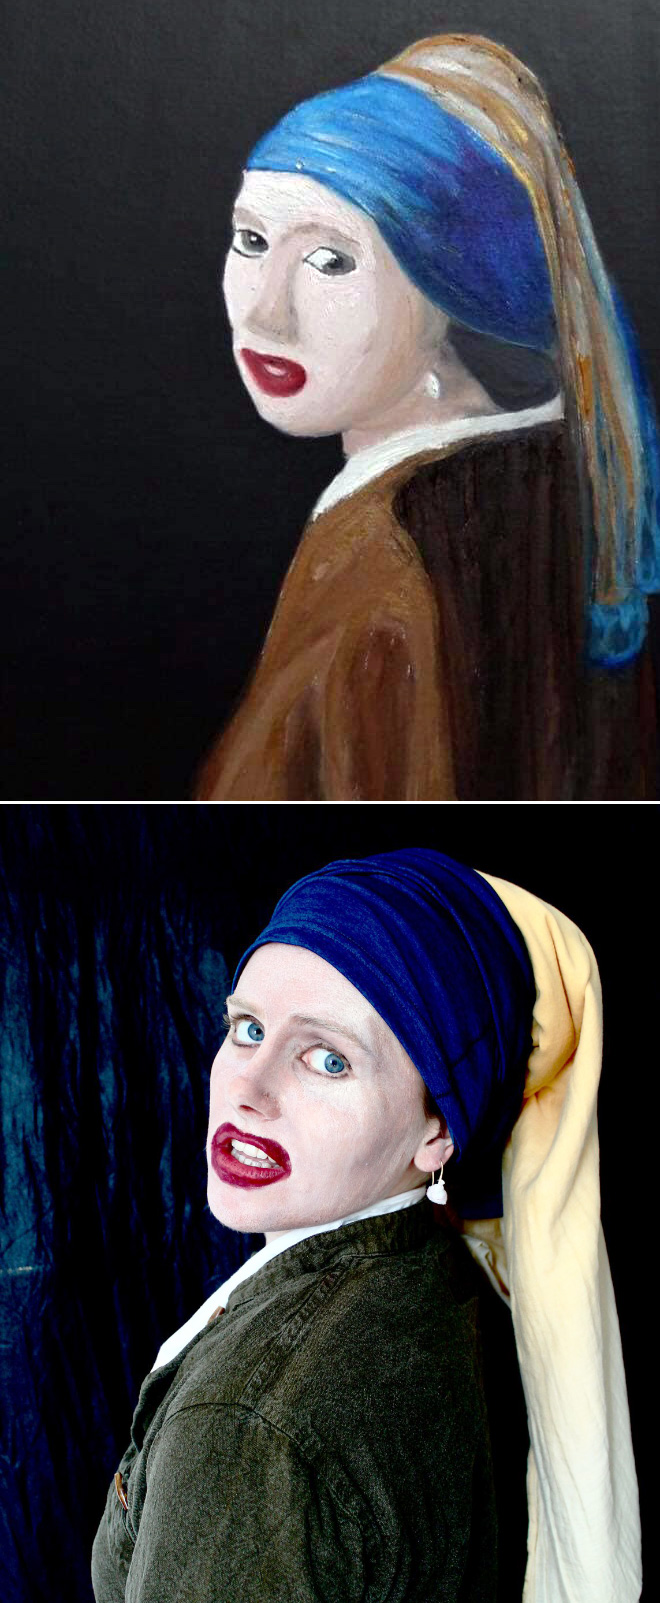 bad amateur painting hilariously recreated.